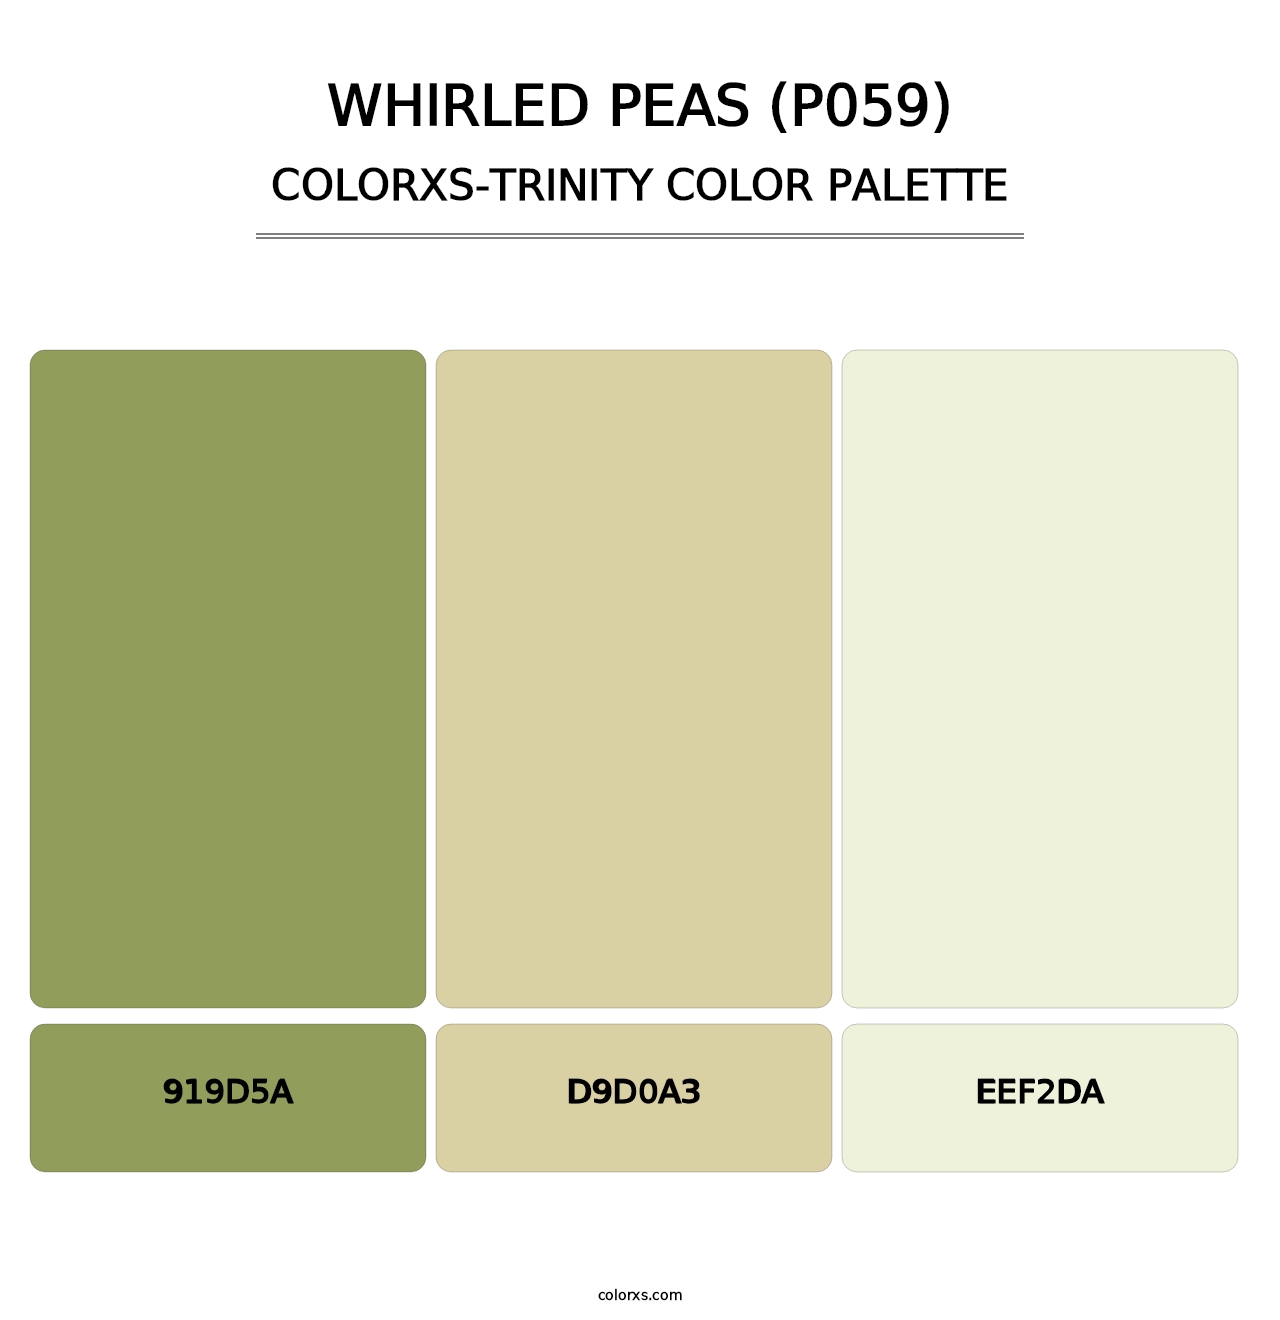 Whirled Peas (P059) - Colorxs Trinity Palette